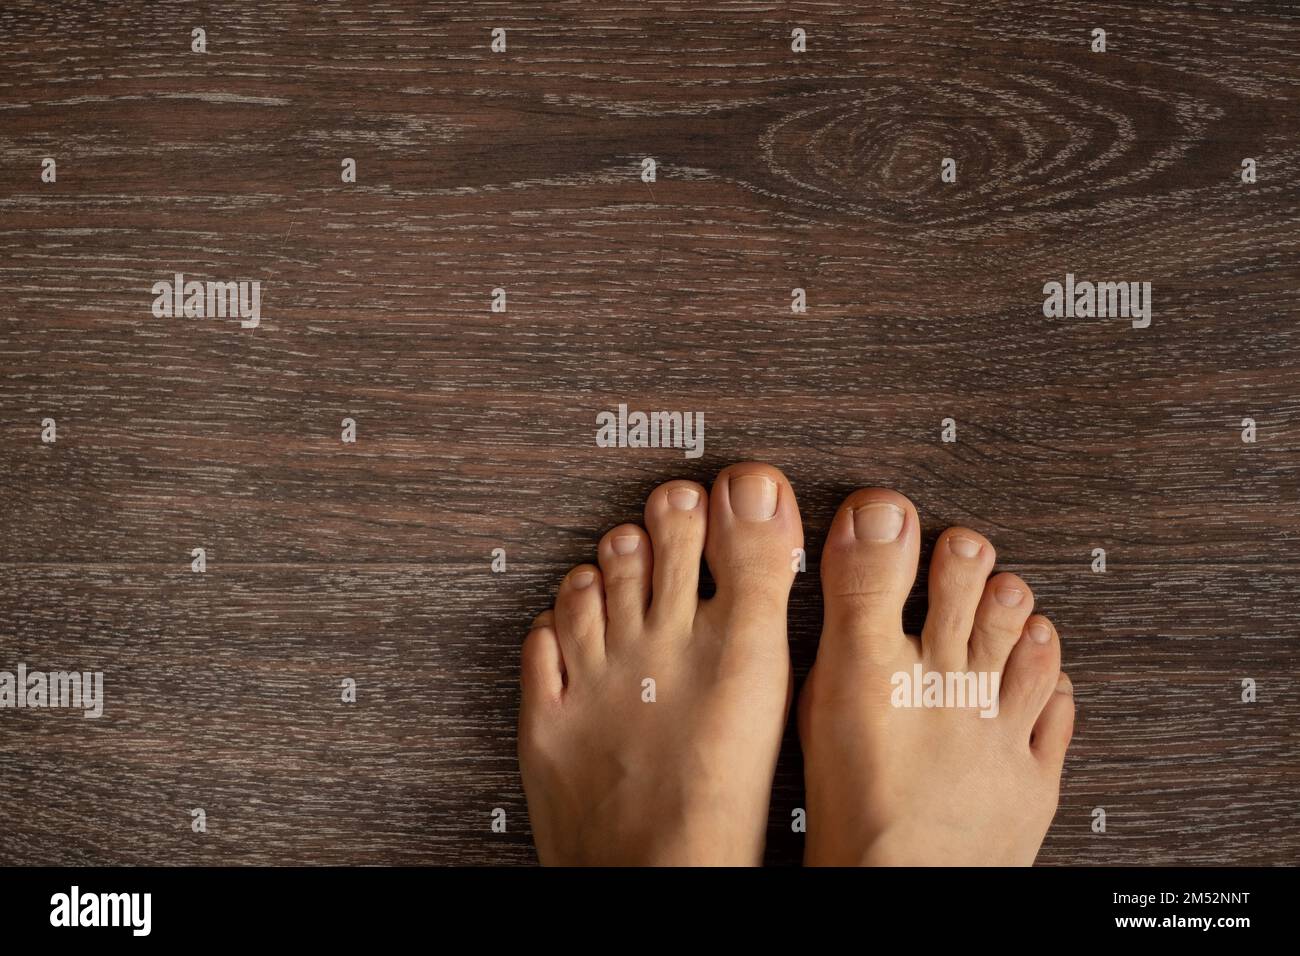 female legs without shoes on a brown wooden floor, top to bottom view Stock Photo